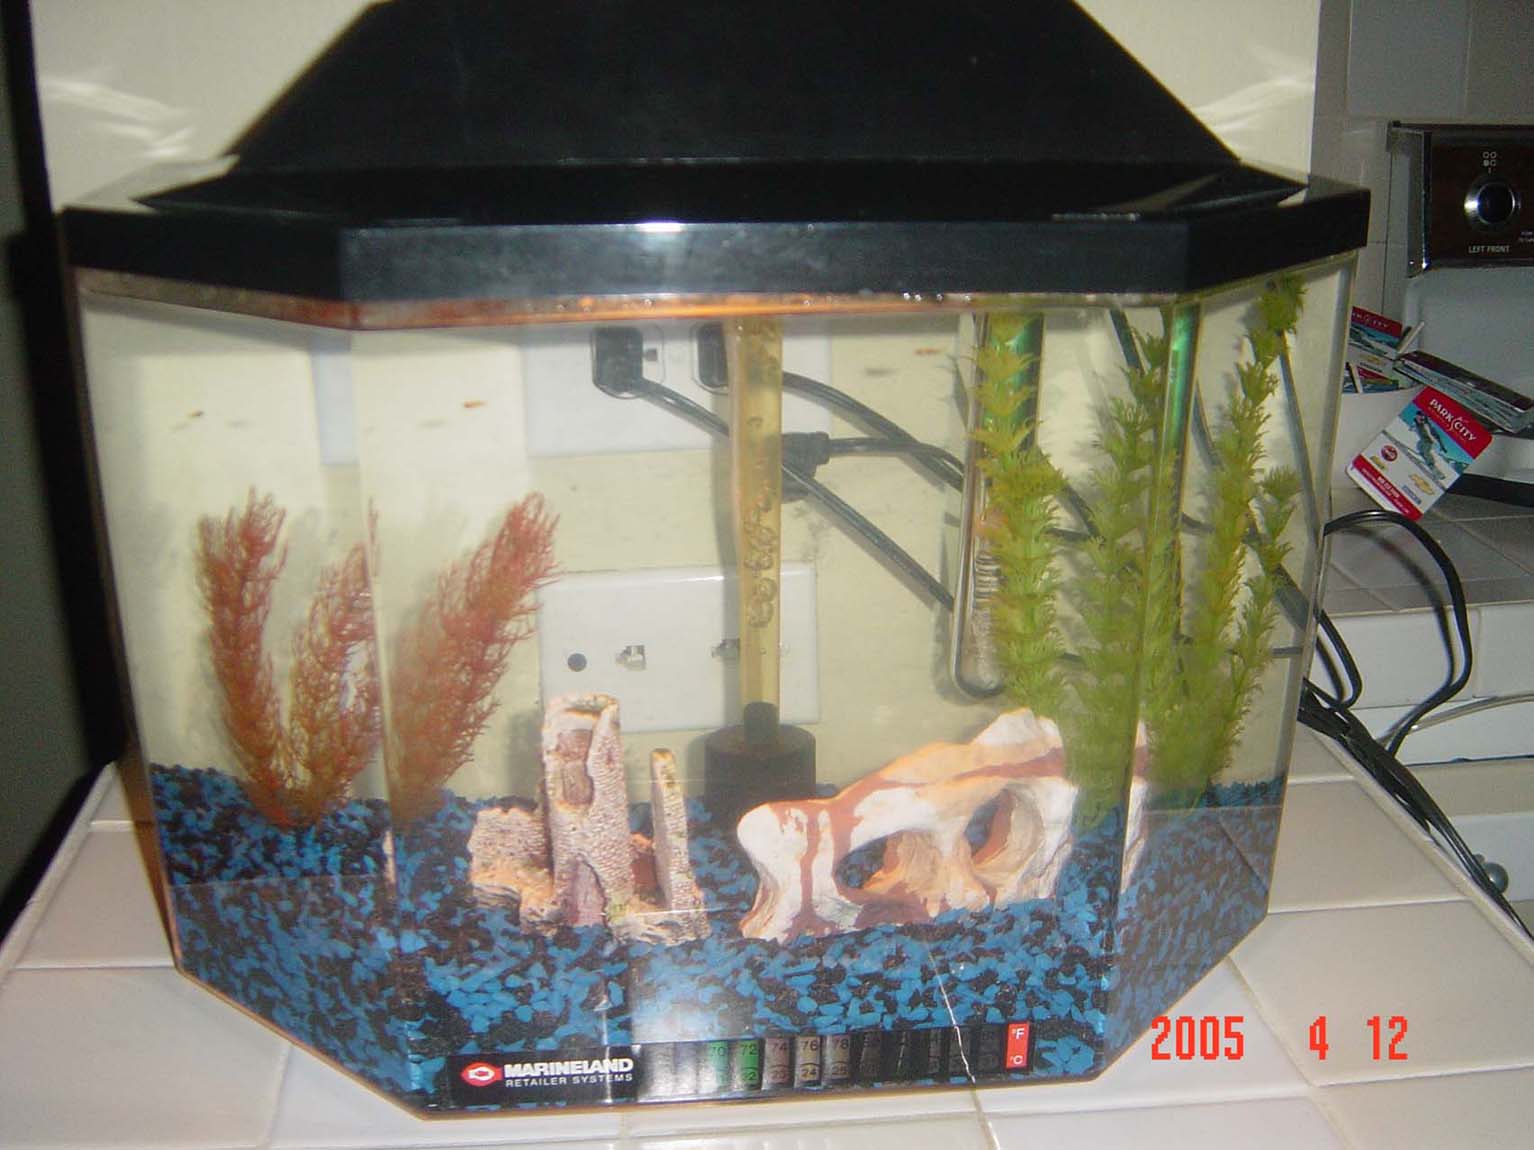 This is the first tank that I owned. I now use it as a QT/Breeding tank. I have 6 swordtail fry in it now.